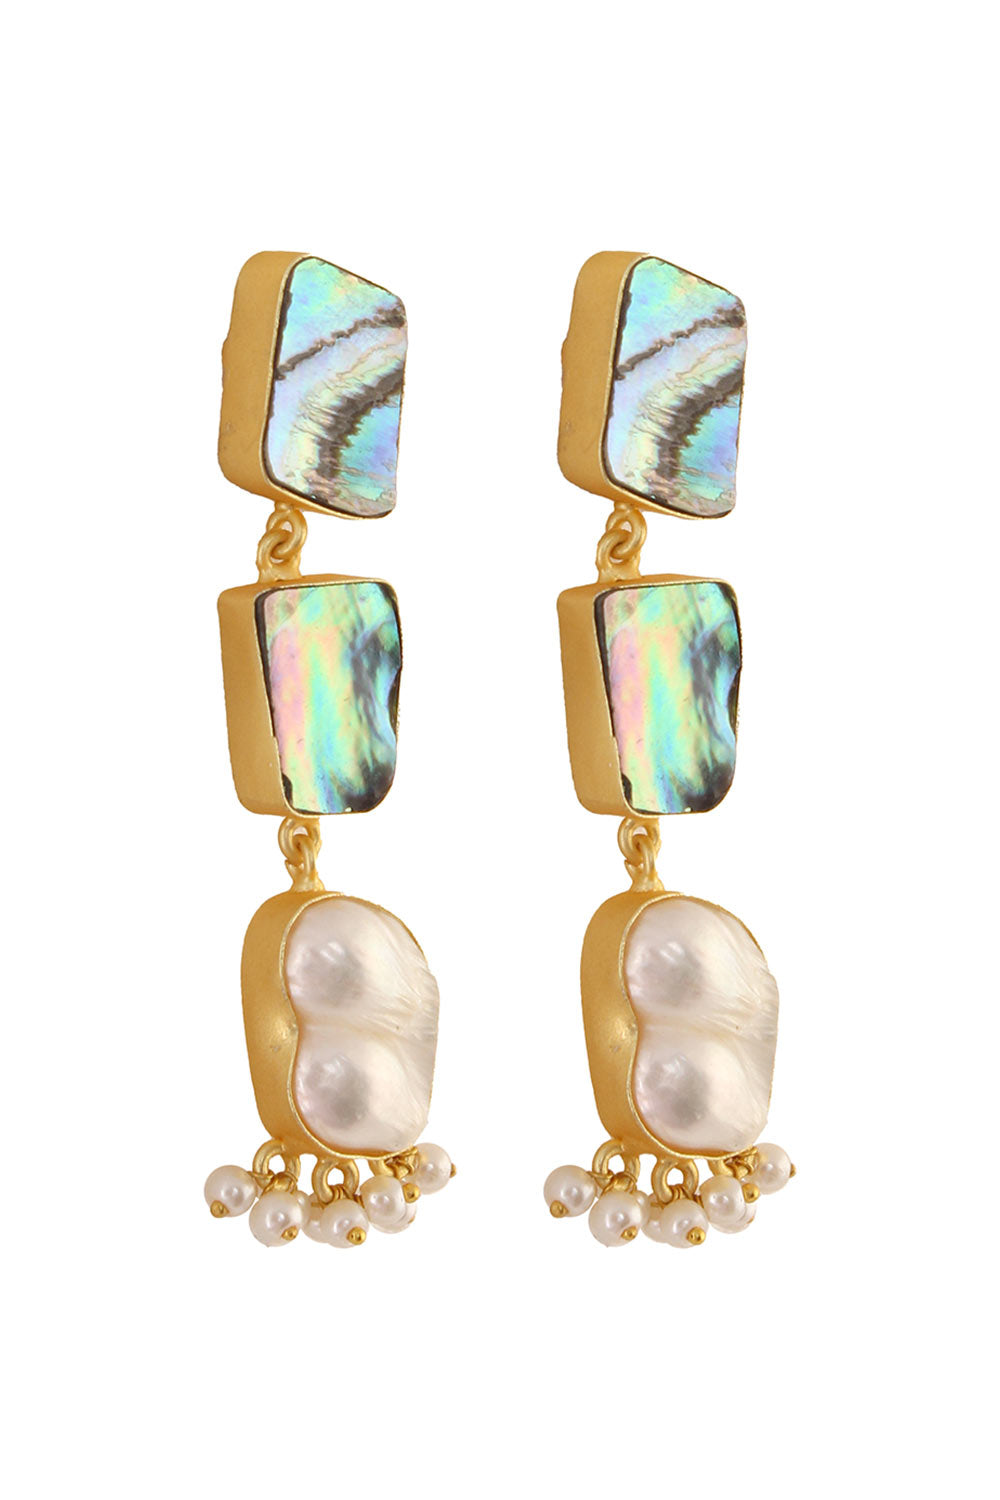 Muriel Contemporary Abalone Baroque Pearl Earrings